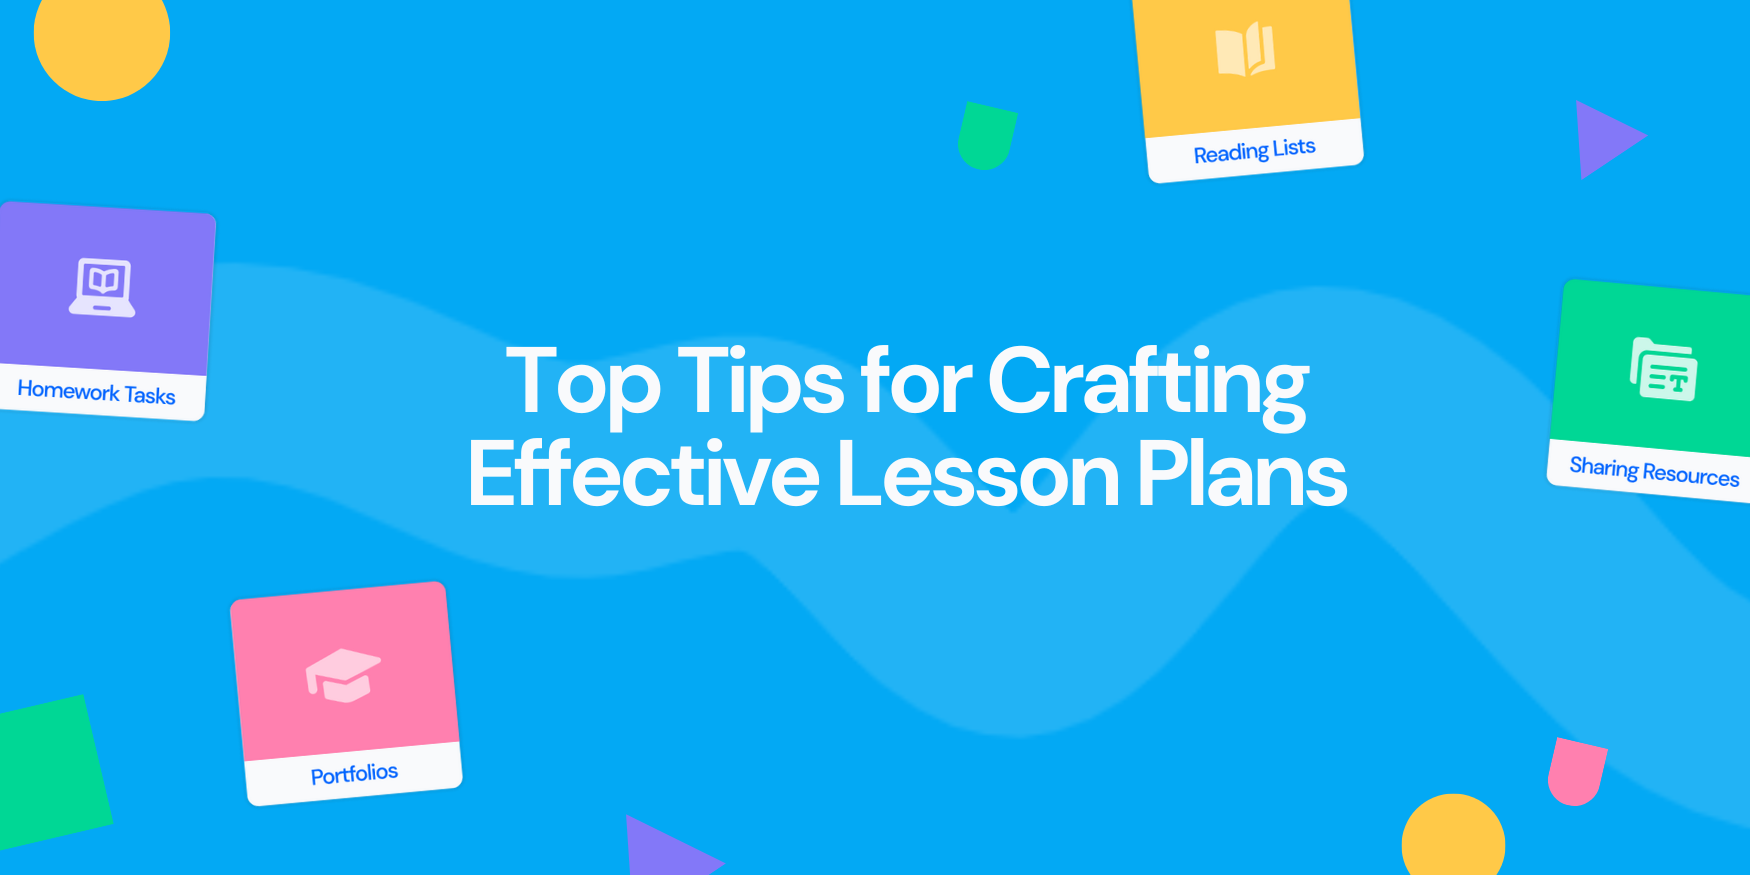 Top Tips for Crafting Effective Lesson Plans